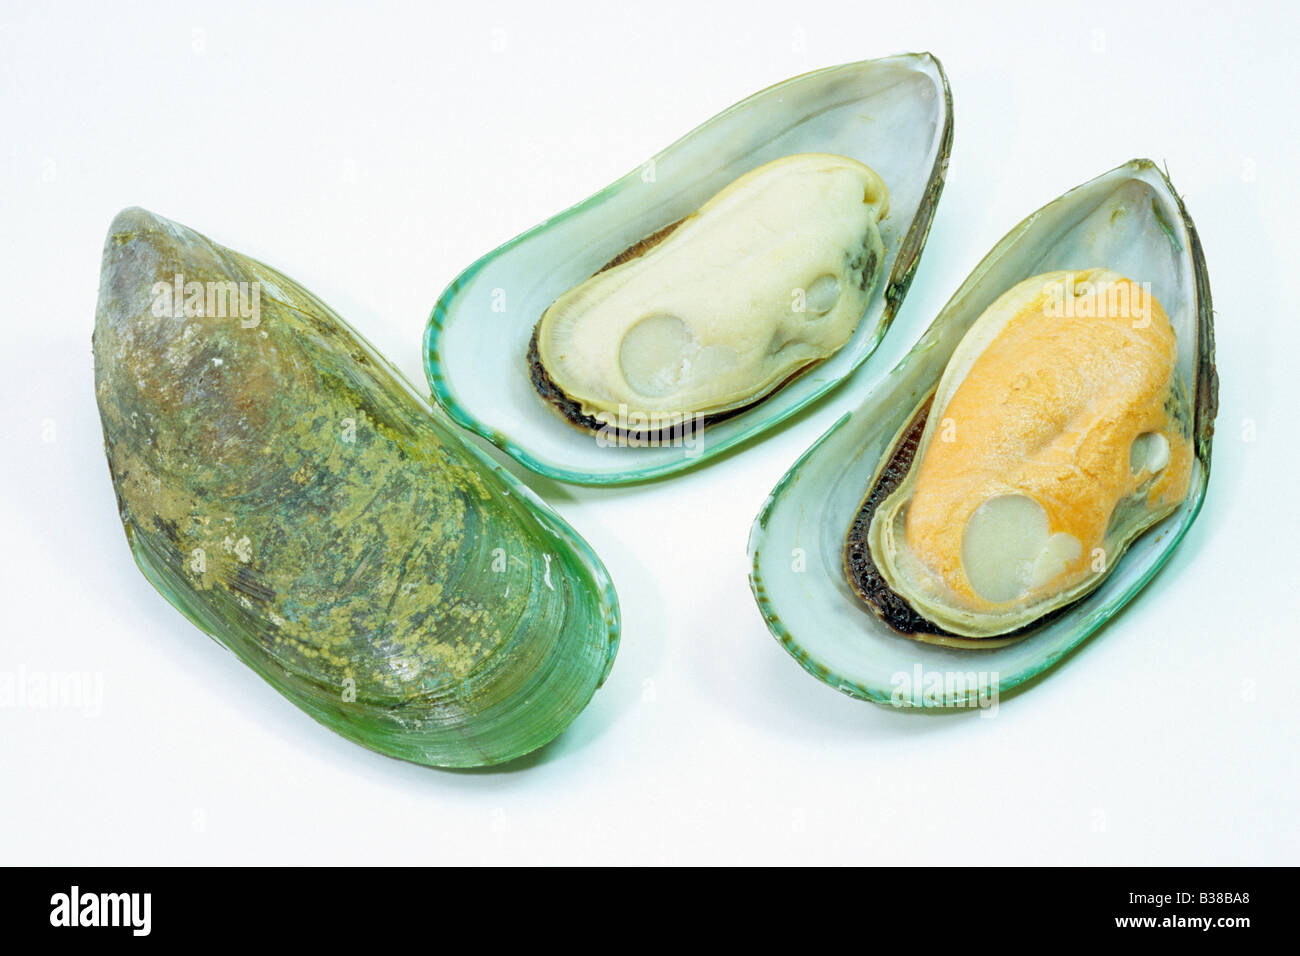 Greenshell Mussel, New Zealand Mussel, Channel Mussel (Perna canaliculus), closed and open, studio picture Stock Photo